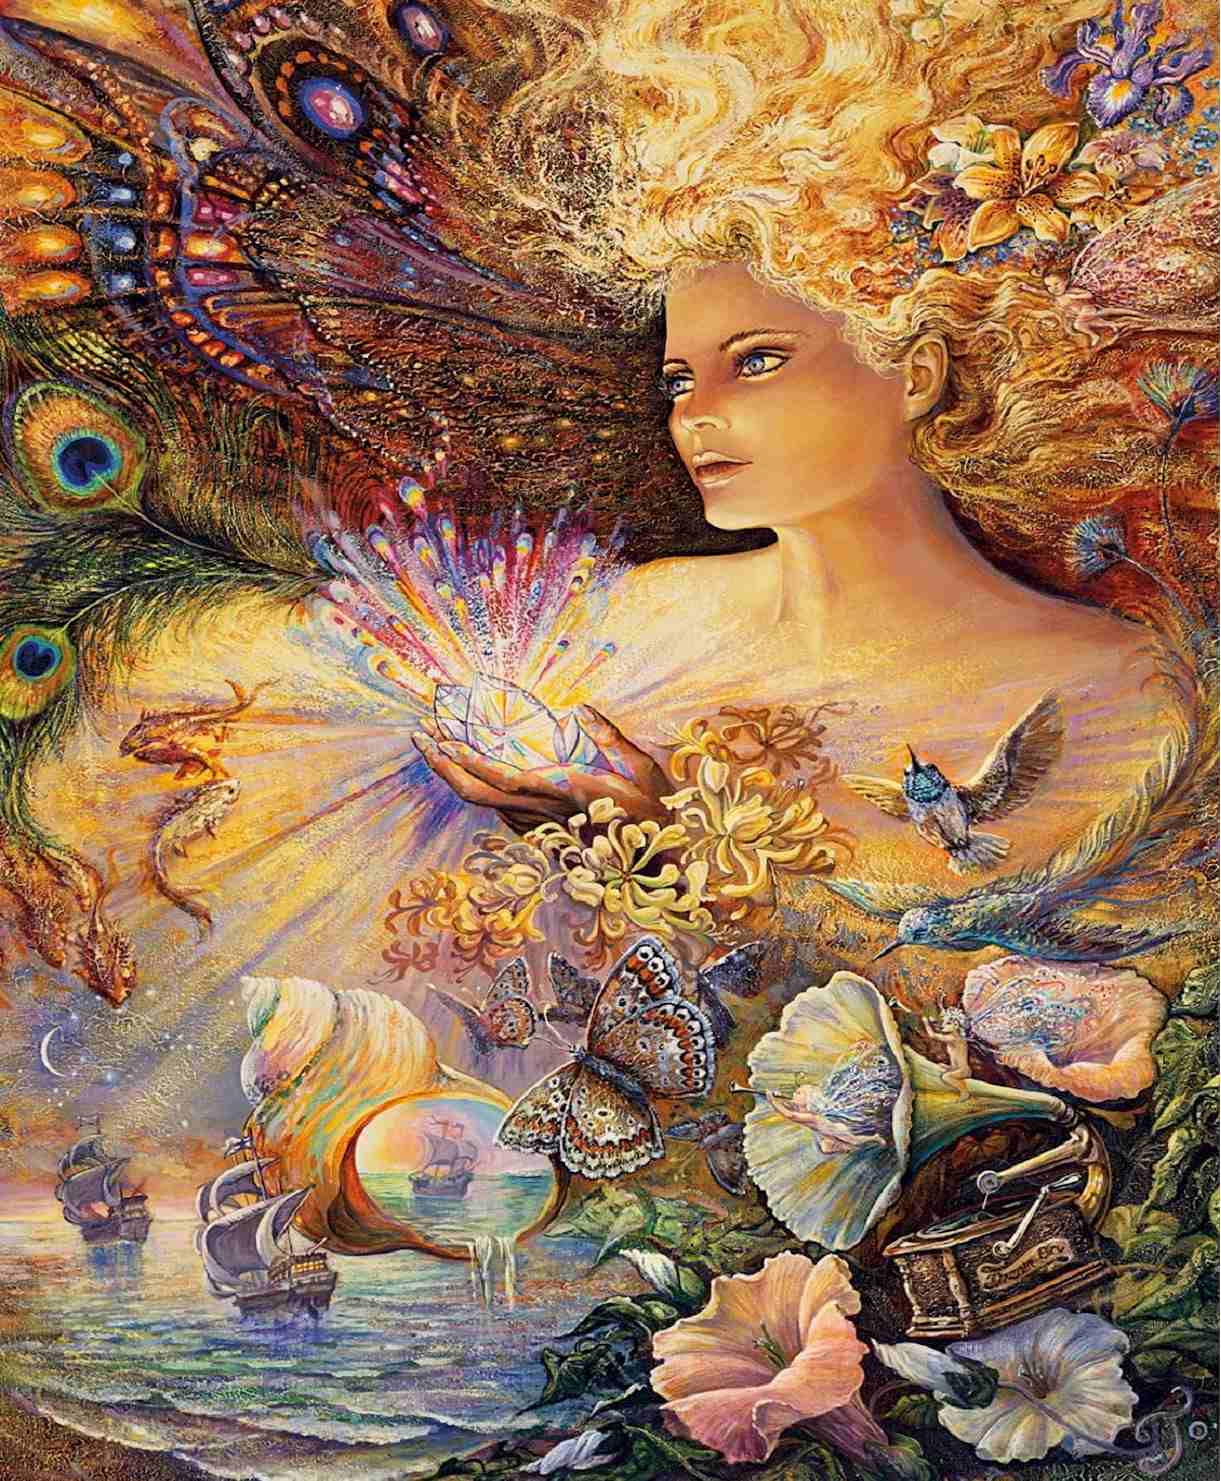  Puzzles - Josephine Wall - Crystal of Enchantment (Glitter Edition) - 1000 Piece #Jigsaw #Puzzle #poster #prints #photo #DiY #vintage #toys